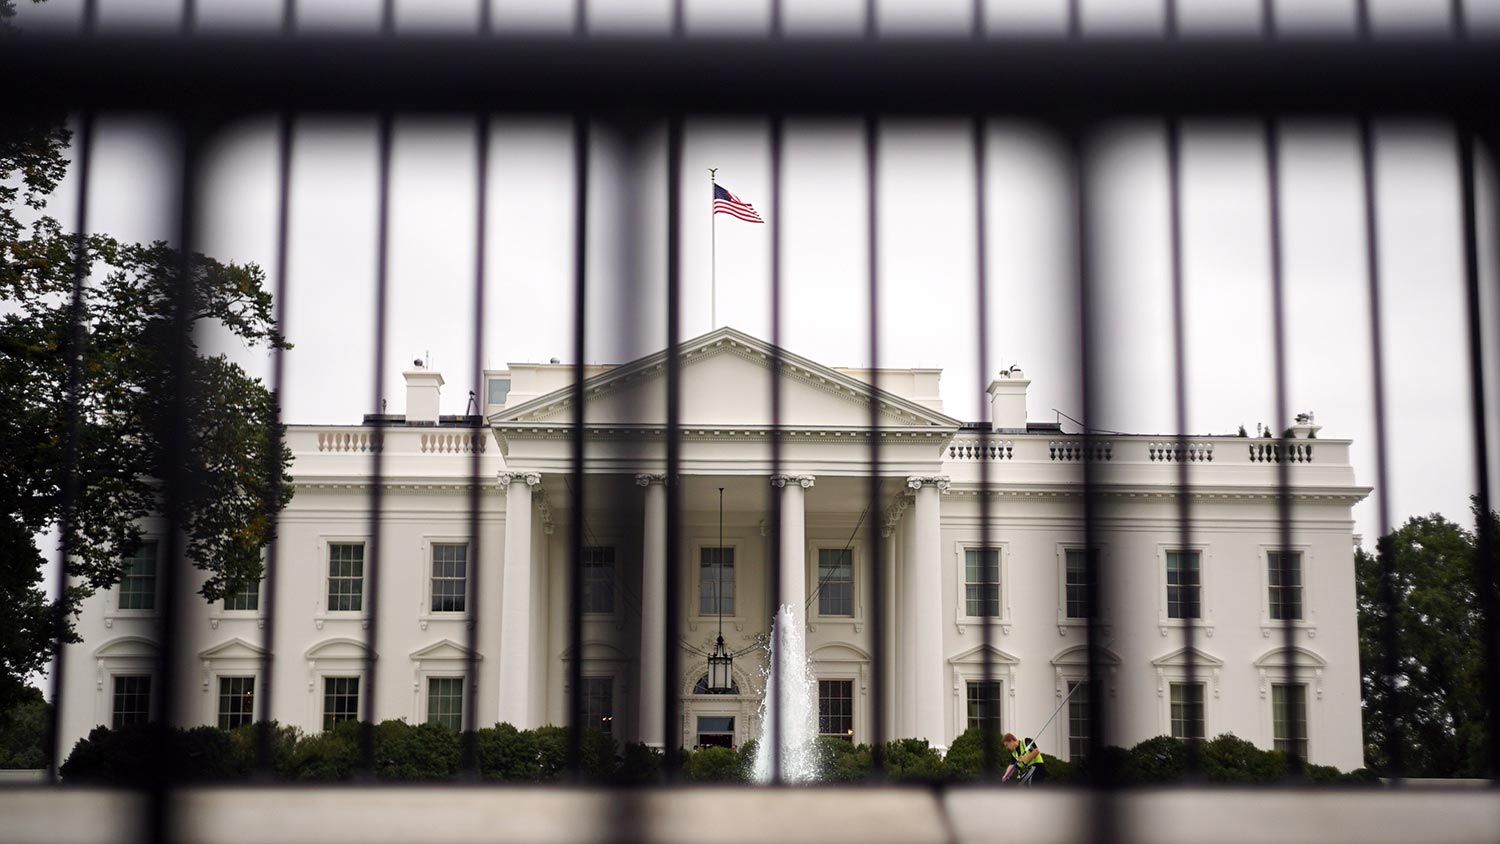 The White House is seen behind a dual layer of fencing on October 3, 2014. A new director has been appointed to head the Secret Service after a series of security breaches.
